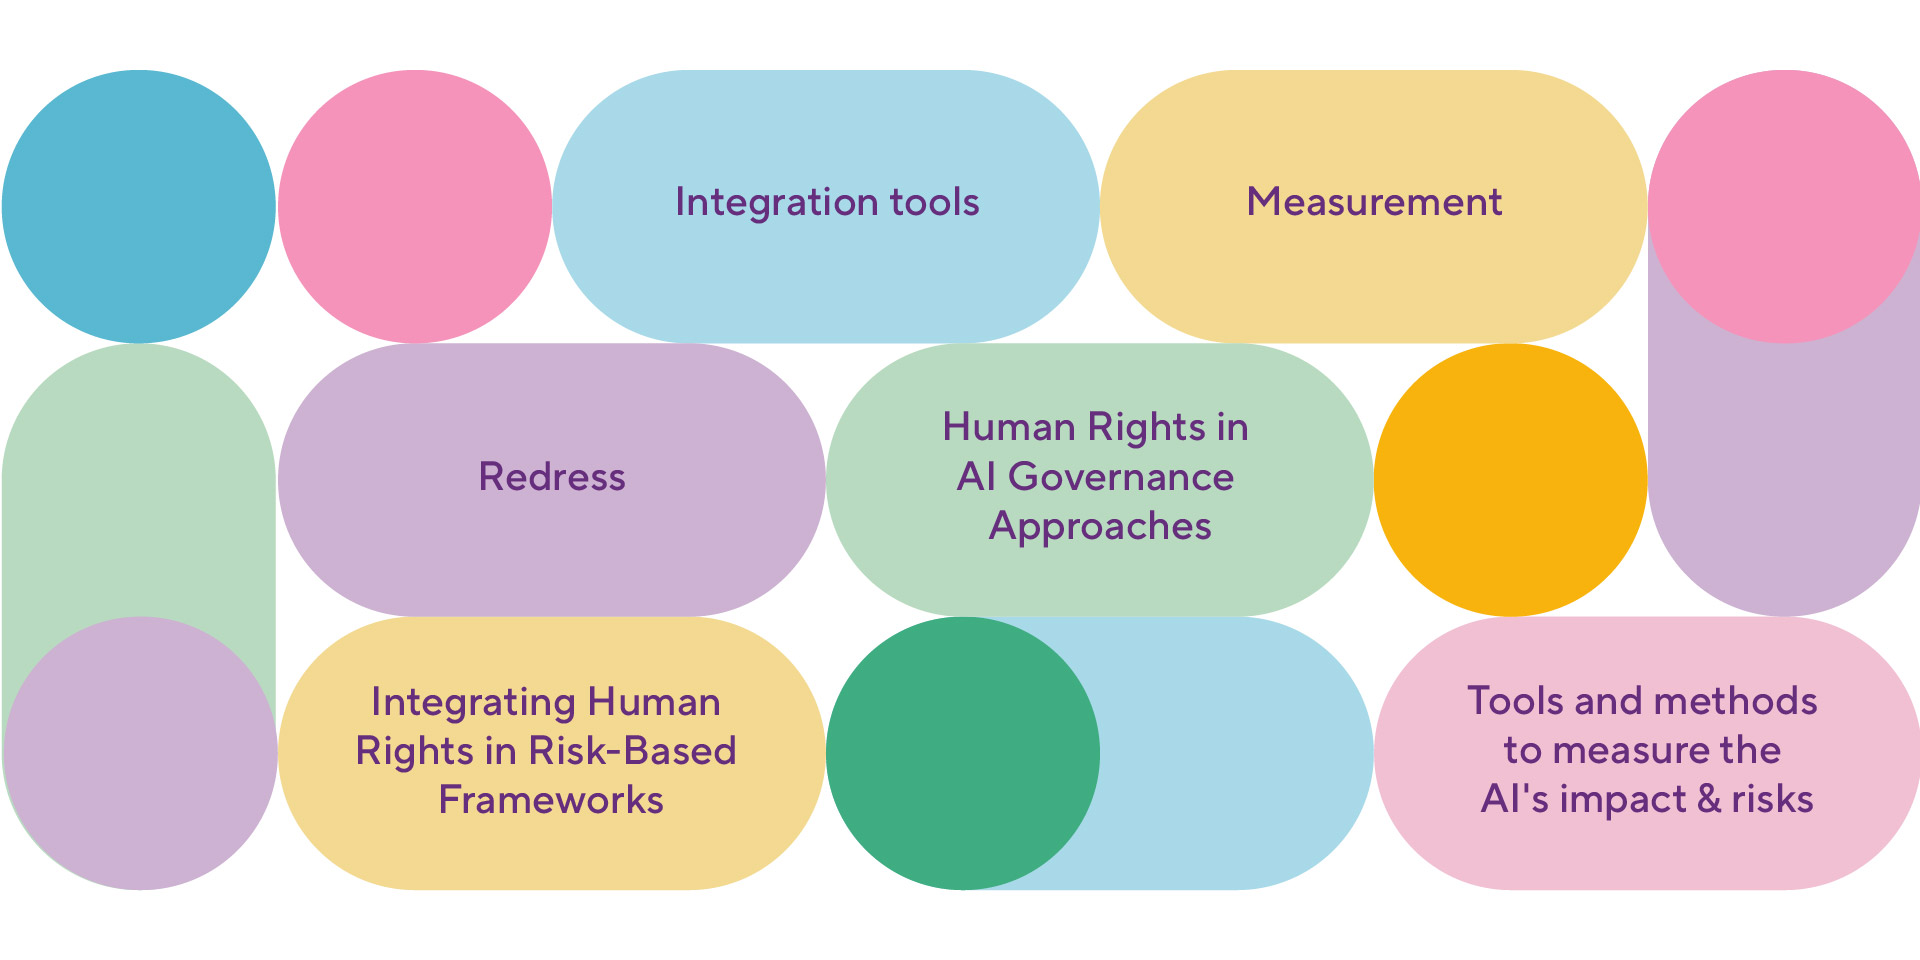 Areas of focus : Integration tools, measurement, redress, human rights in ai governance approaches, integrating human rights in risk based frameworks, tools and methods to measure the ai's impact and risks